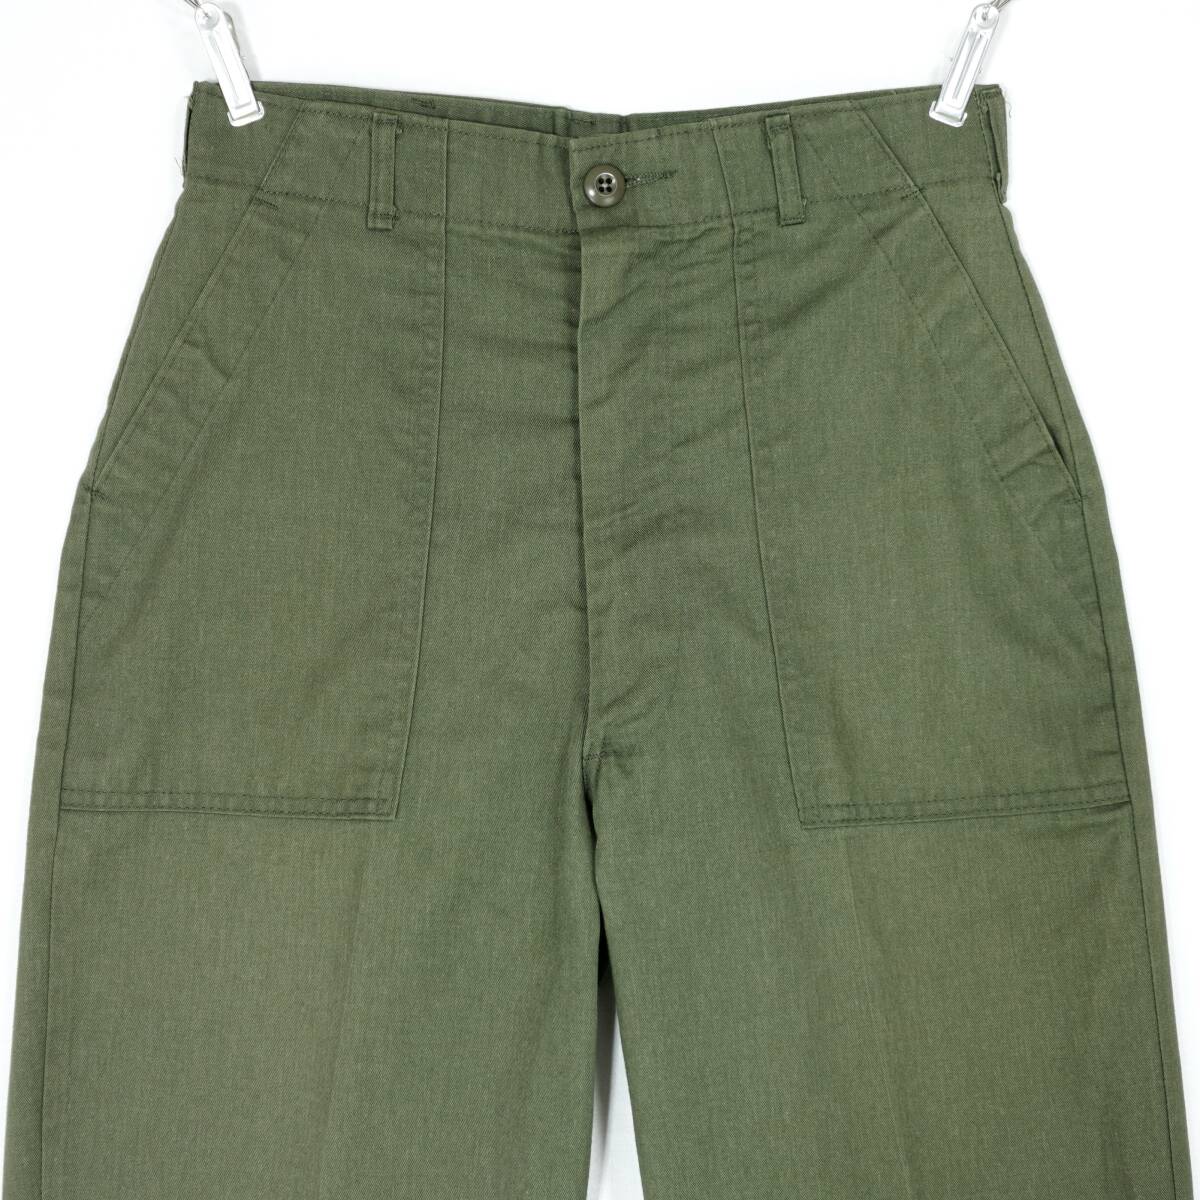 US ARMY UTILITY TROUSERS OG-507 1985s W30 L33 MIL24009 Vintage アメリカ軍 ベイカーパンツ 1980年代 アメリカ製 ヴィンテージ_画像3